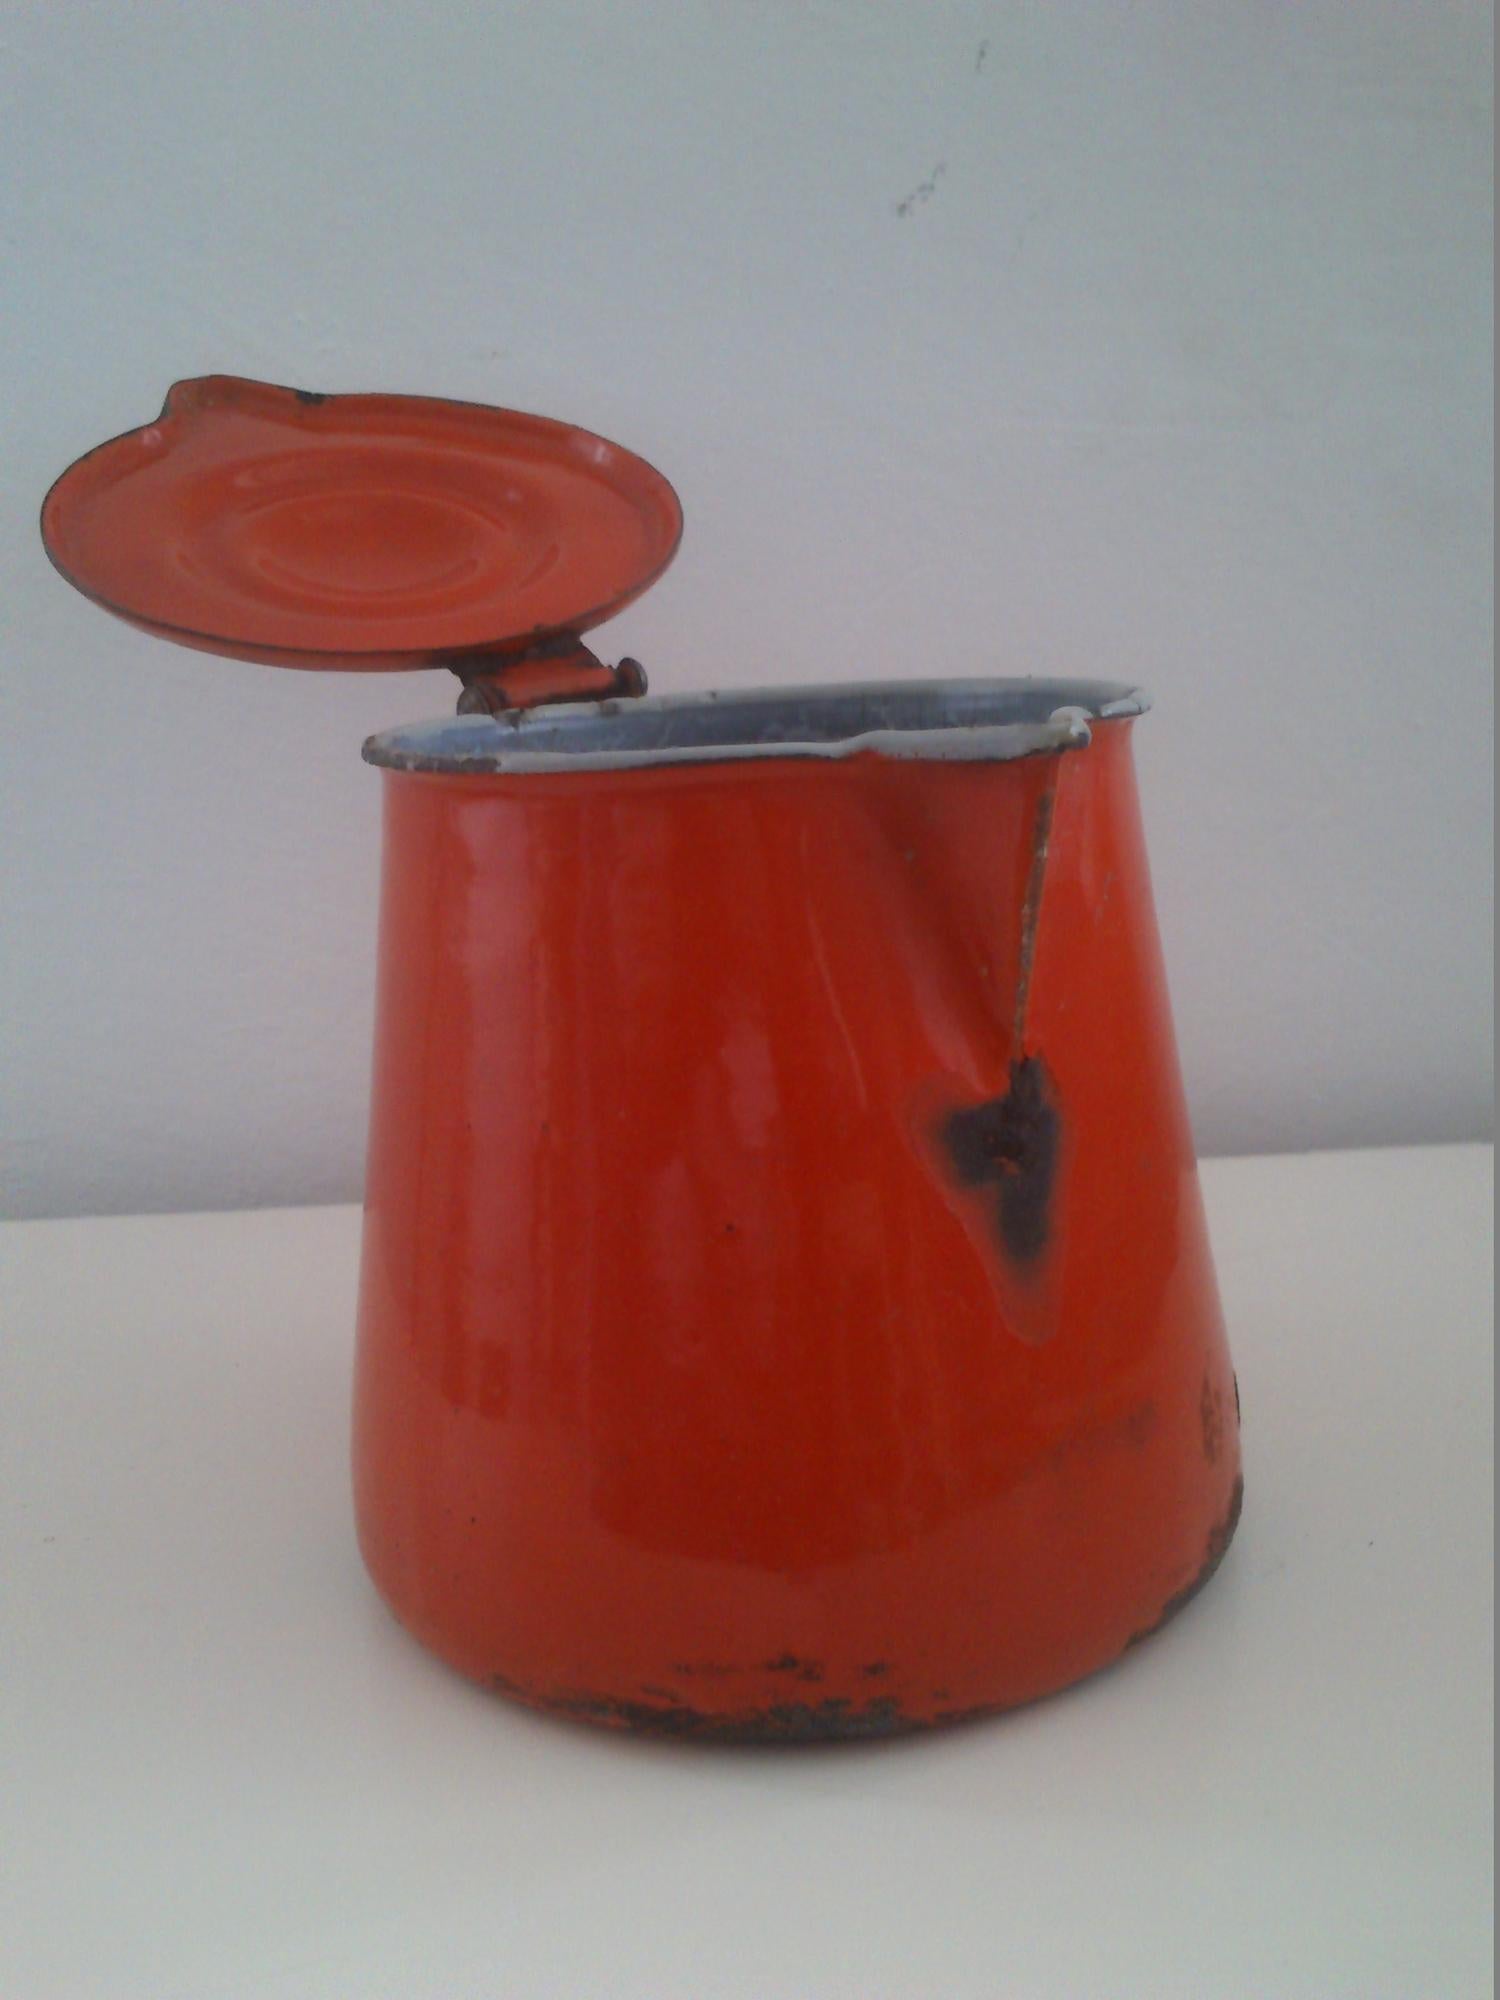 Vintage enamel pitcher with lid, circa 1950s.